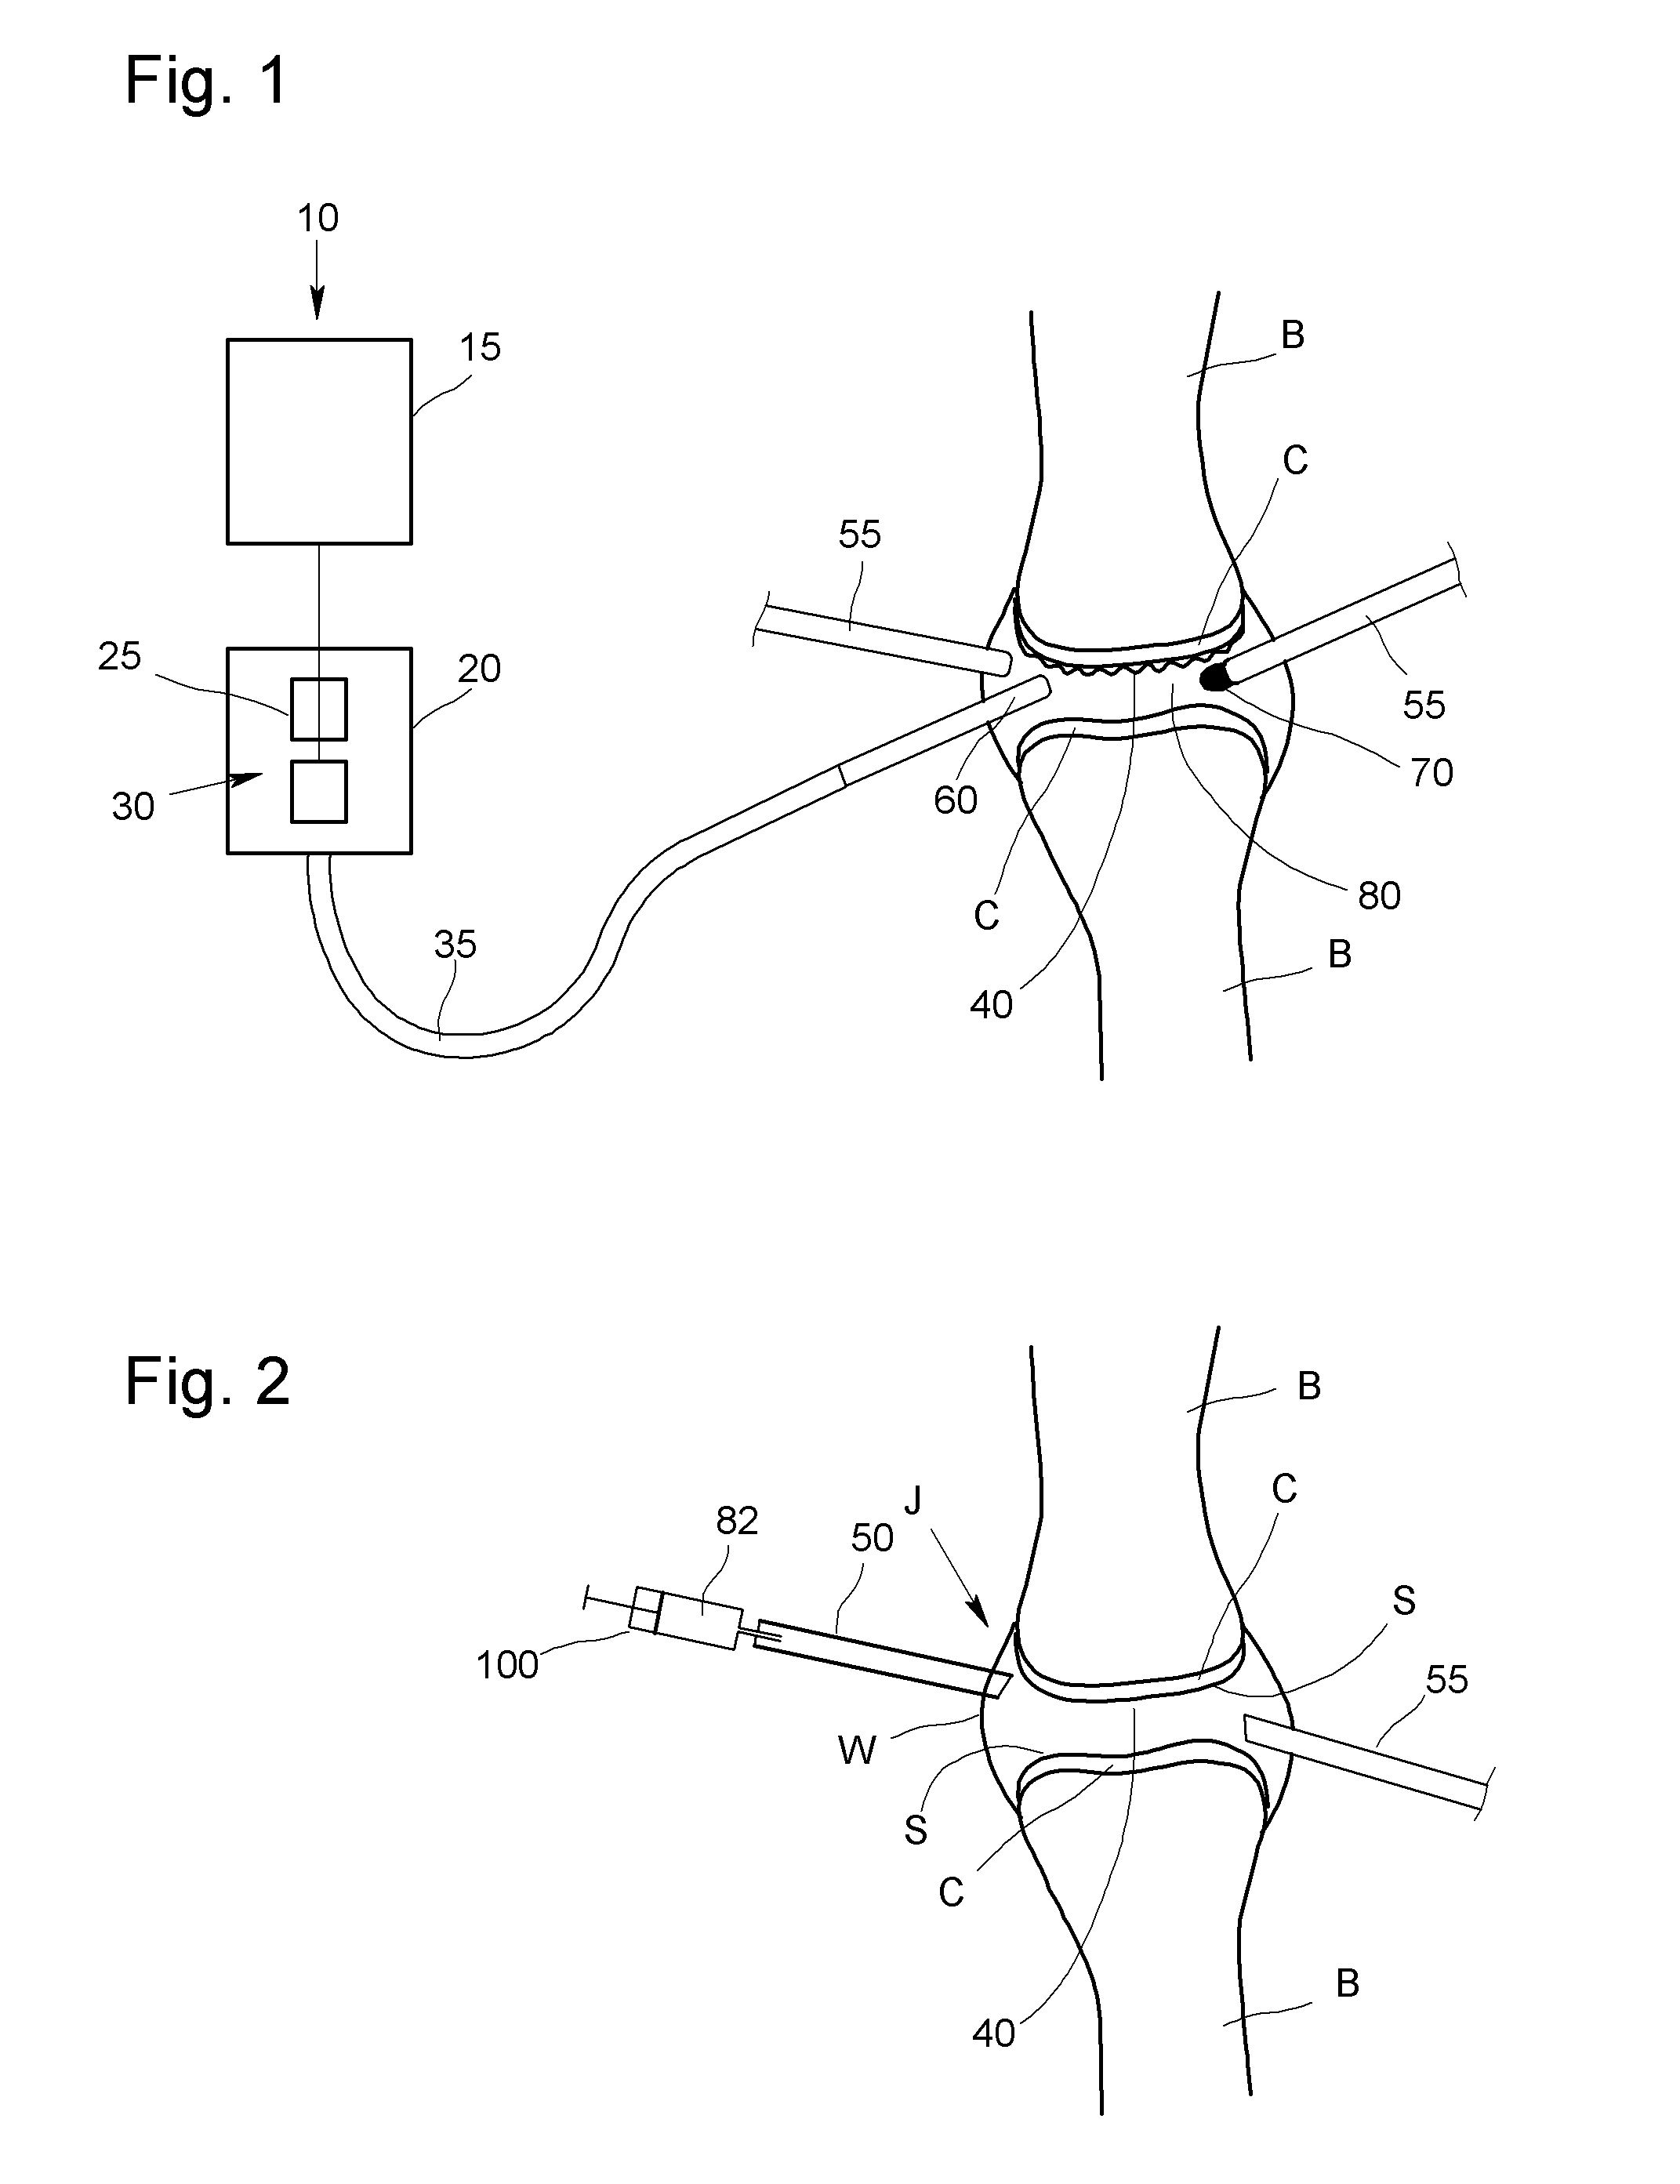 Method for the ablation of cartilage tissue in a knee joint using indocyanine